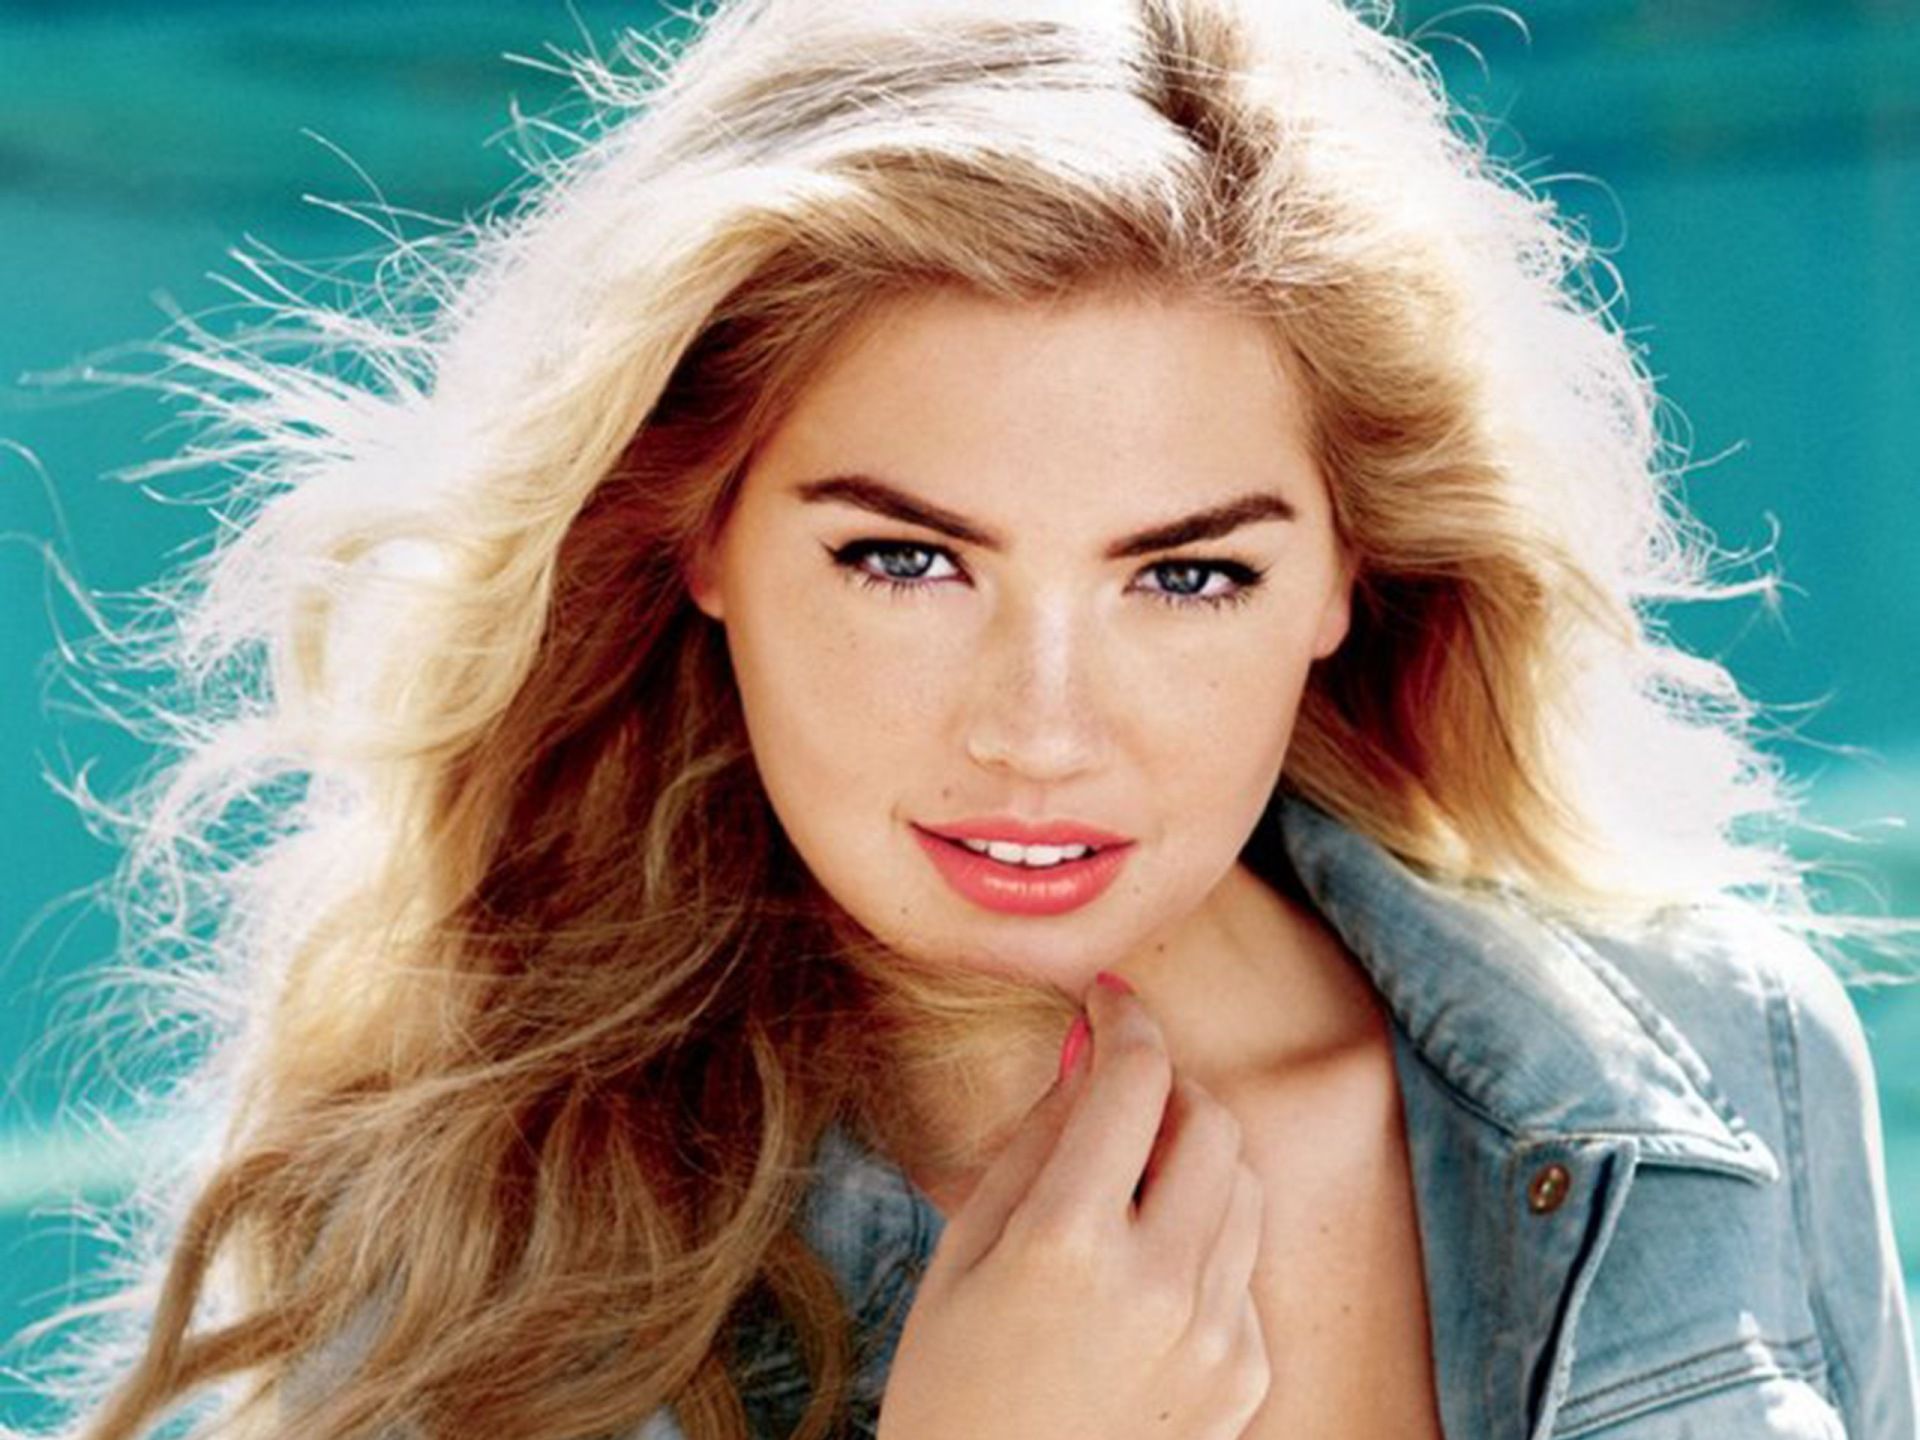 Kate Upton Wallpaper High Quality And Definition